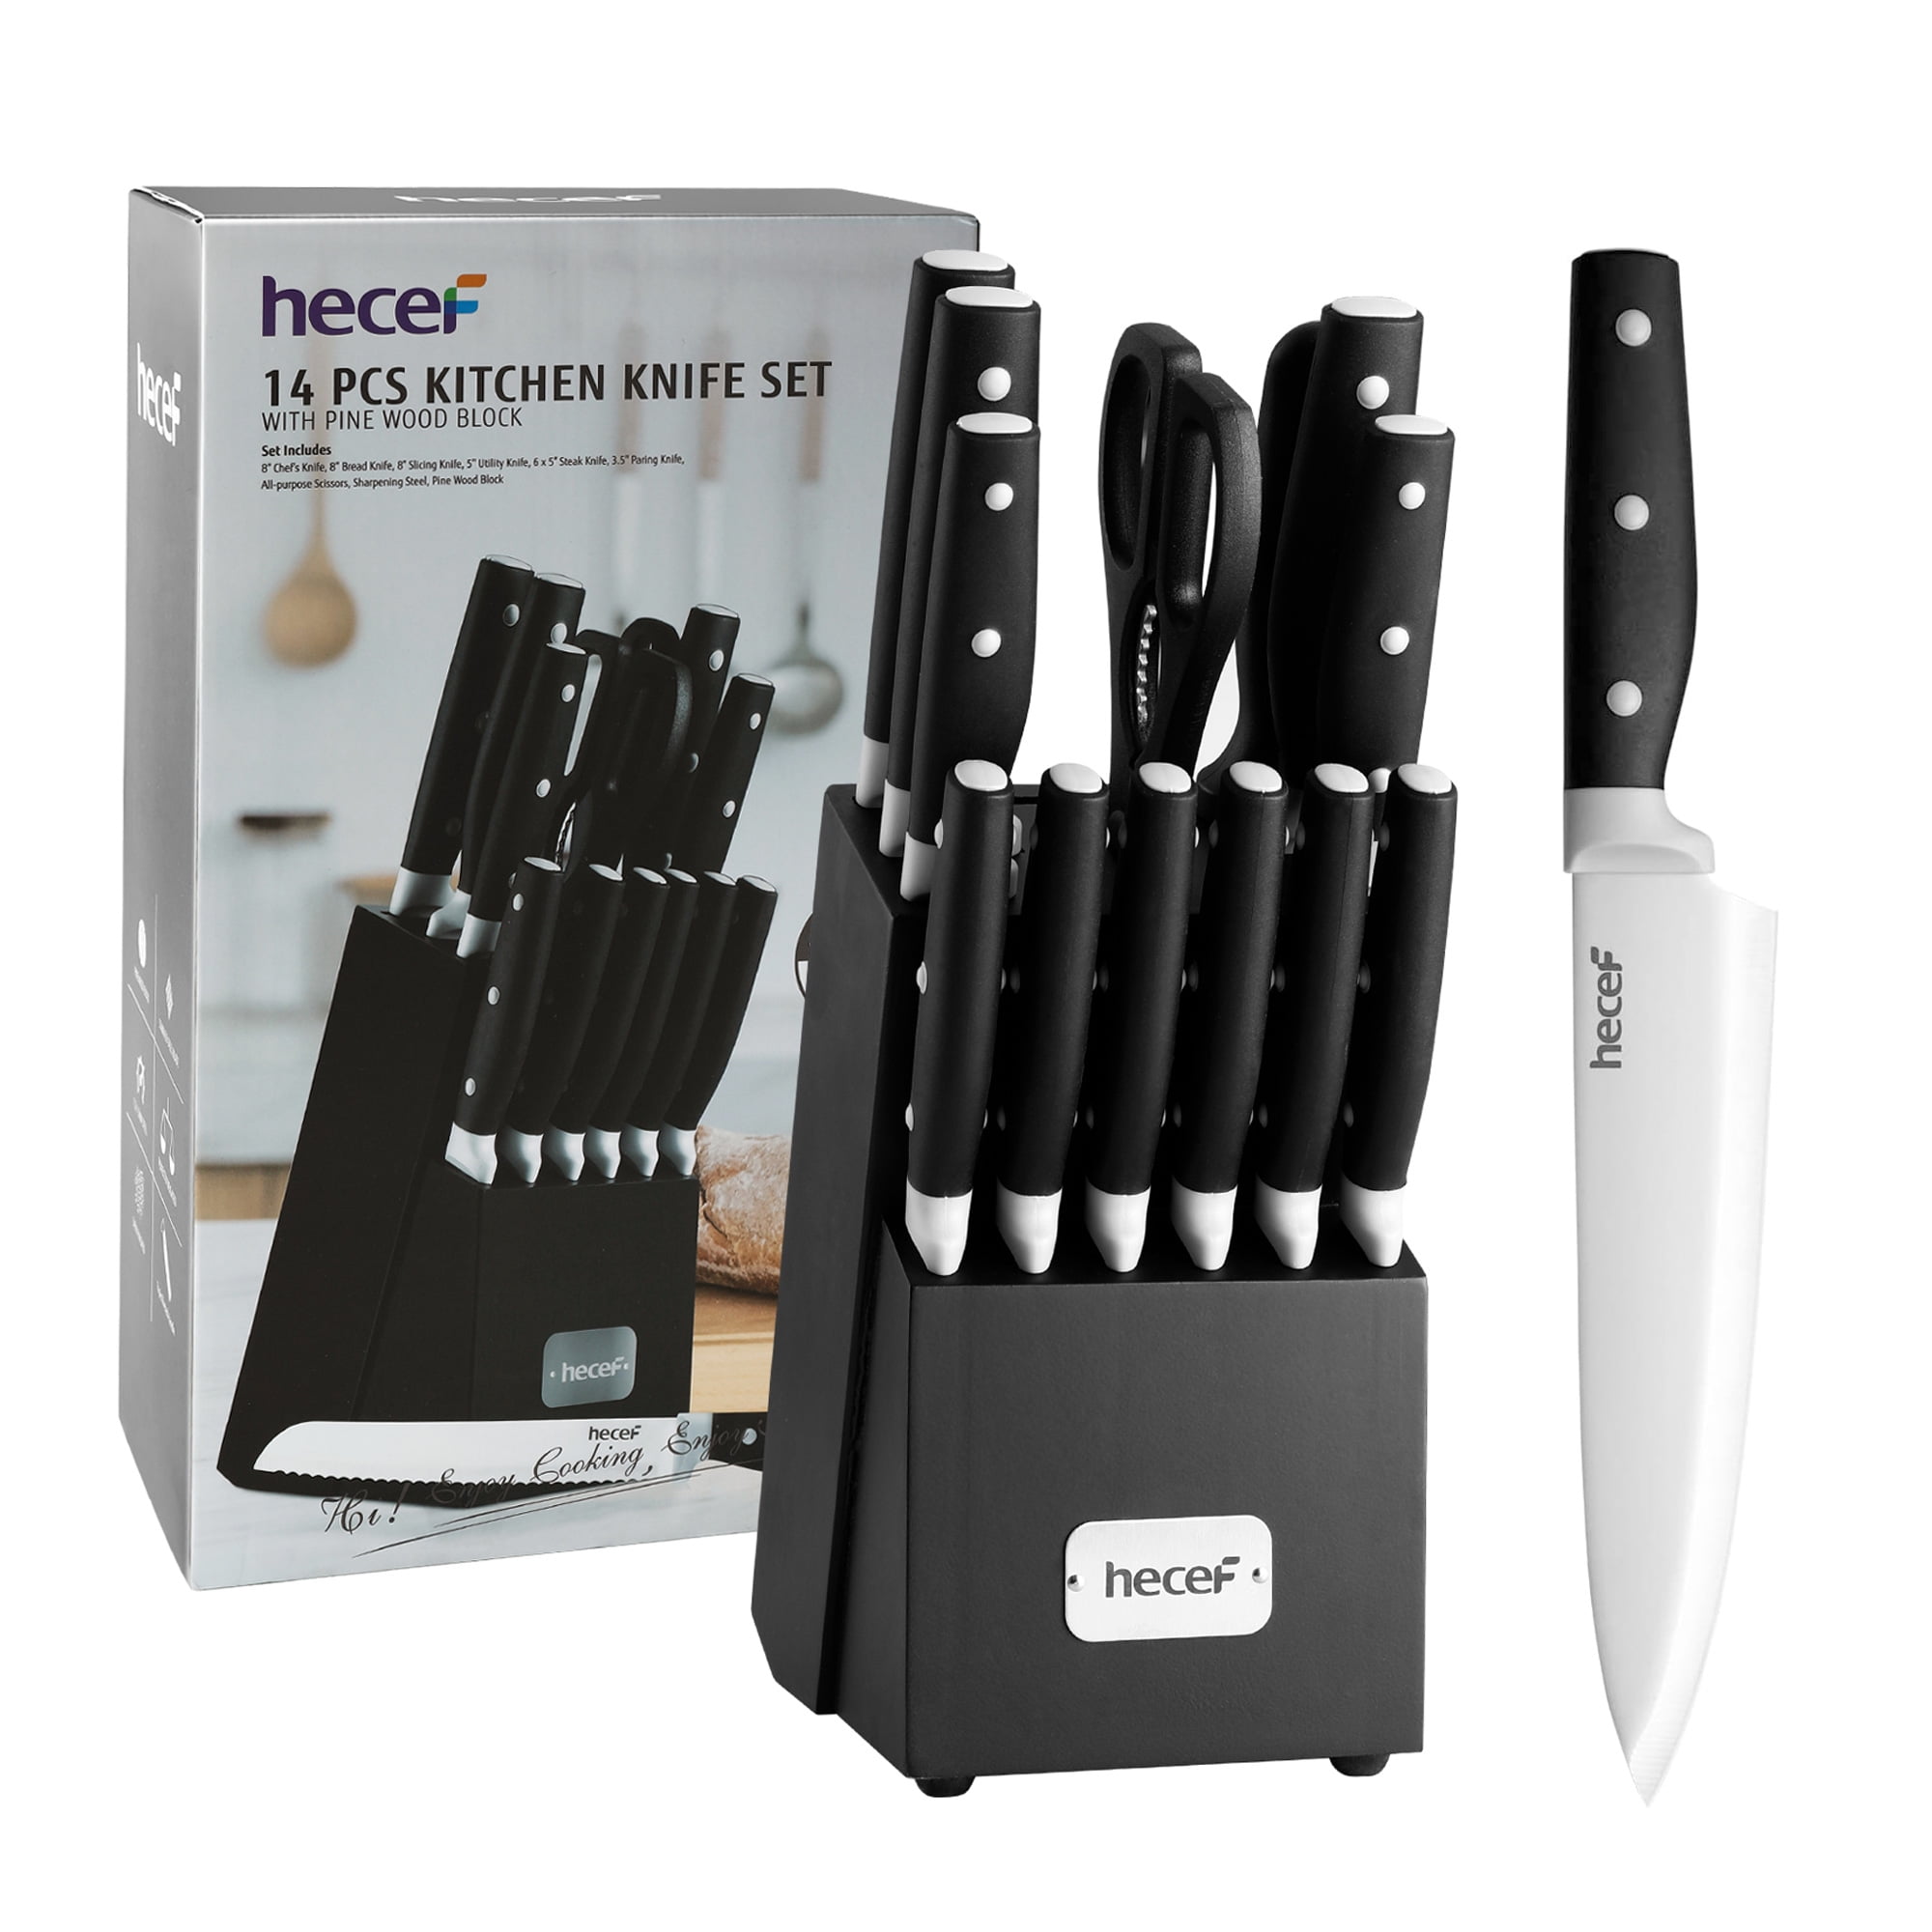 HAUSHOF 6 Piece Stainless Steel Assorted Knife Set HH22091AE